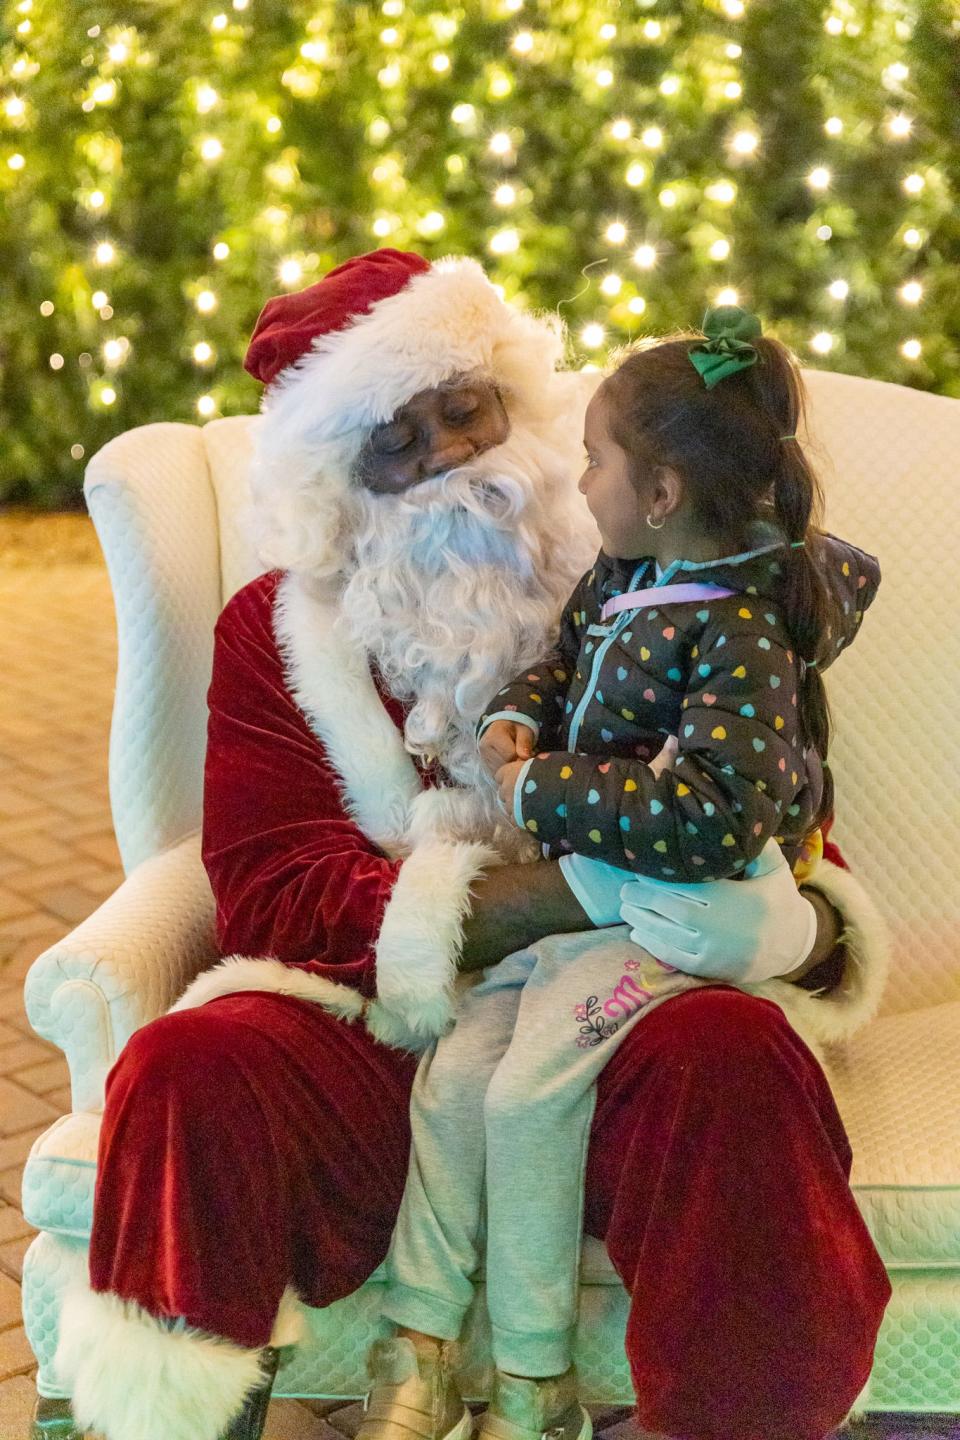 Santa was on hand at Selby Gardens' Lights in Bloom event to sit for photos and hear children’s wishes.